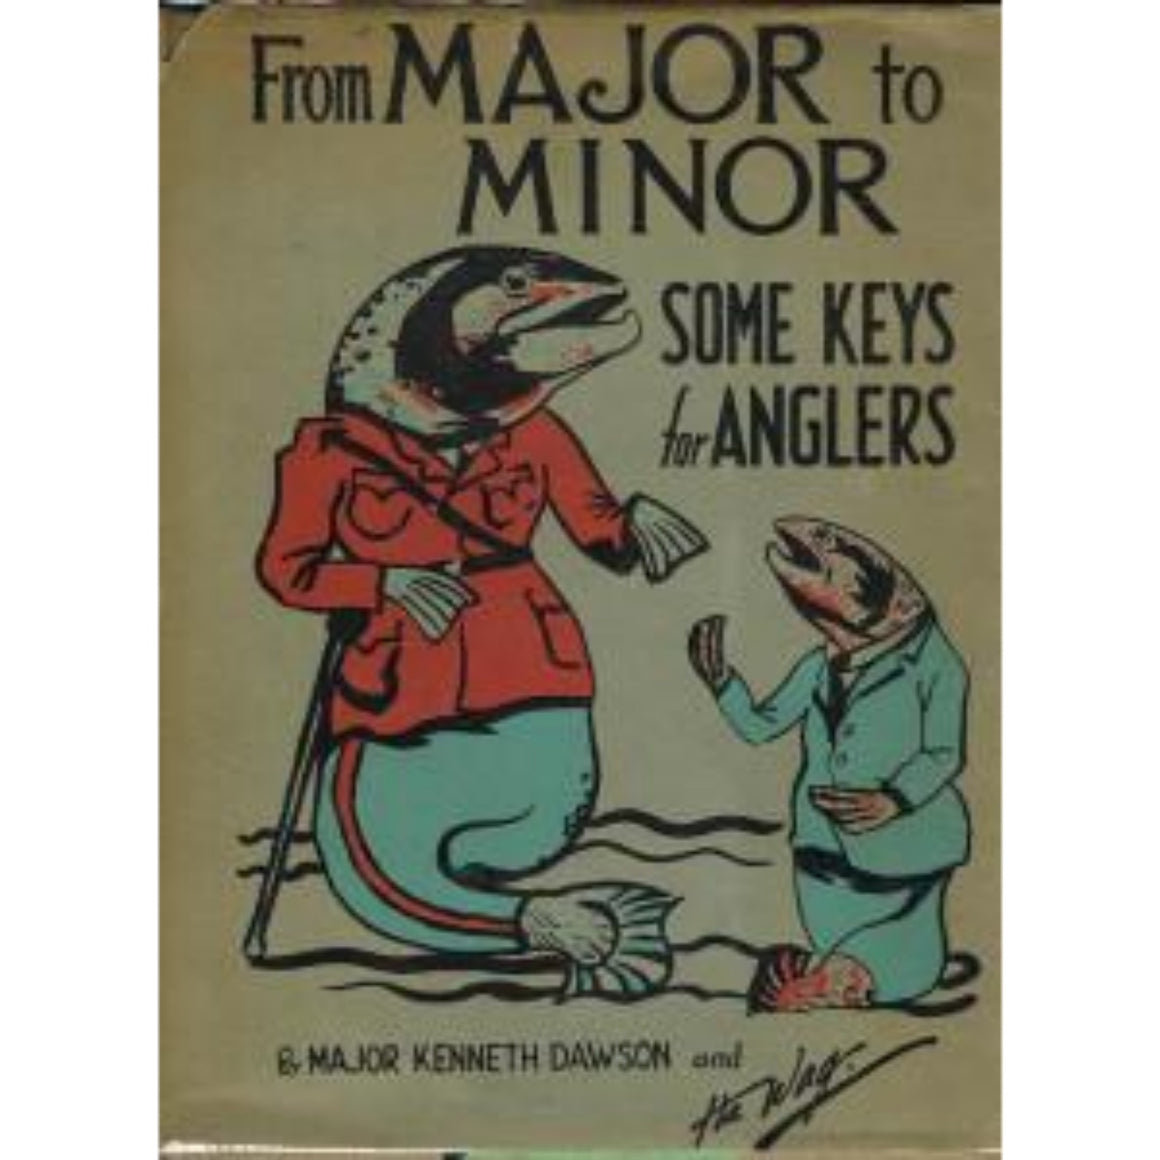 From Major to Minor: Some Keys for Anglers